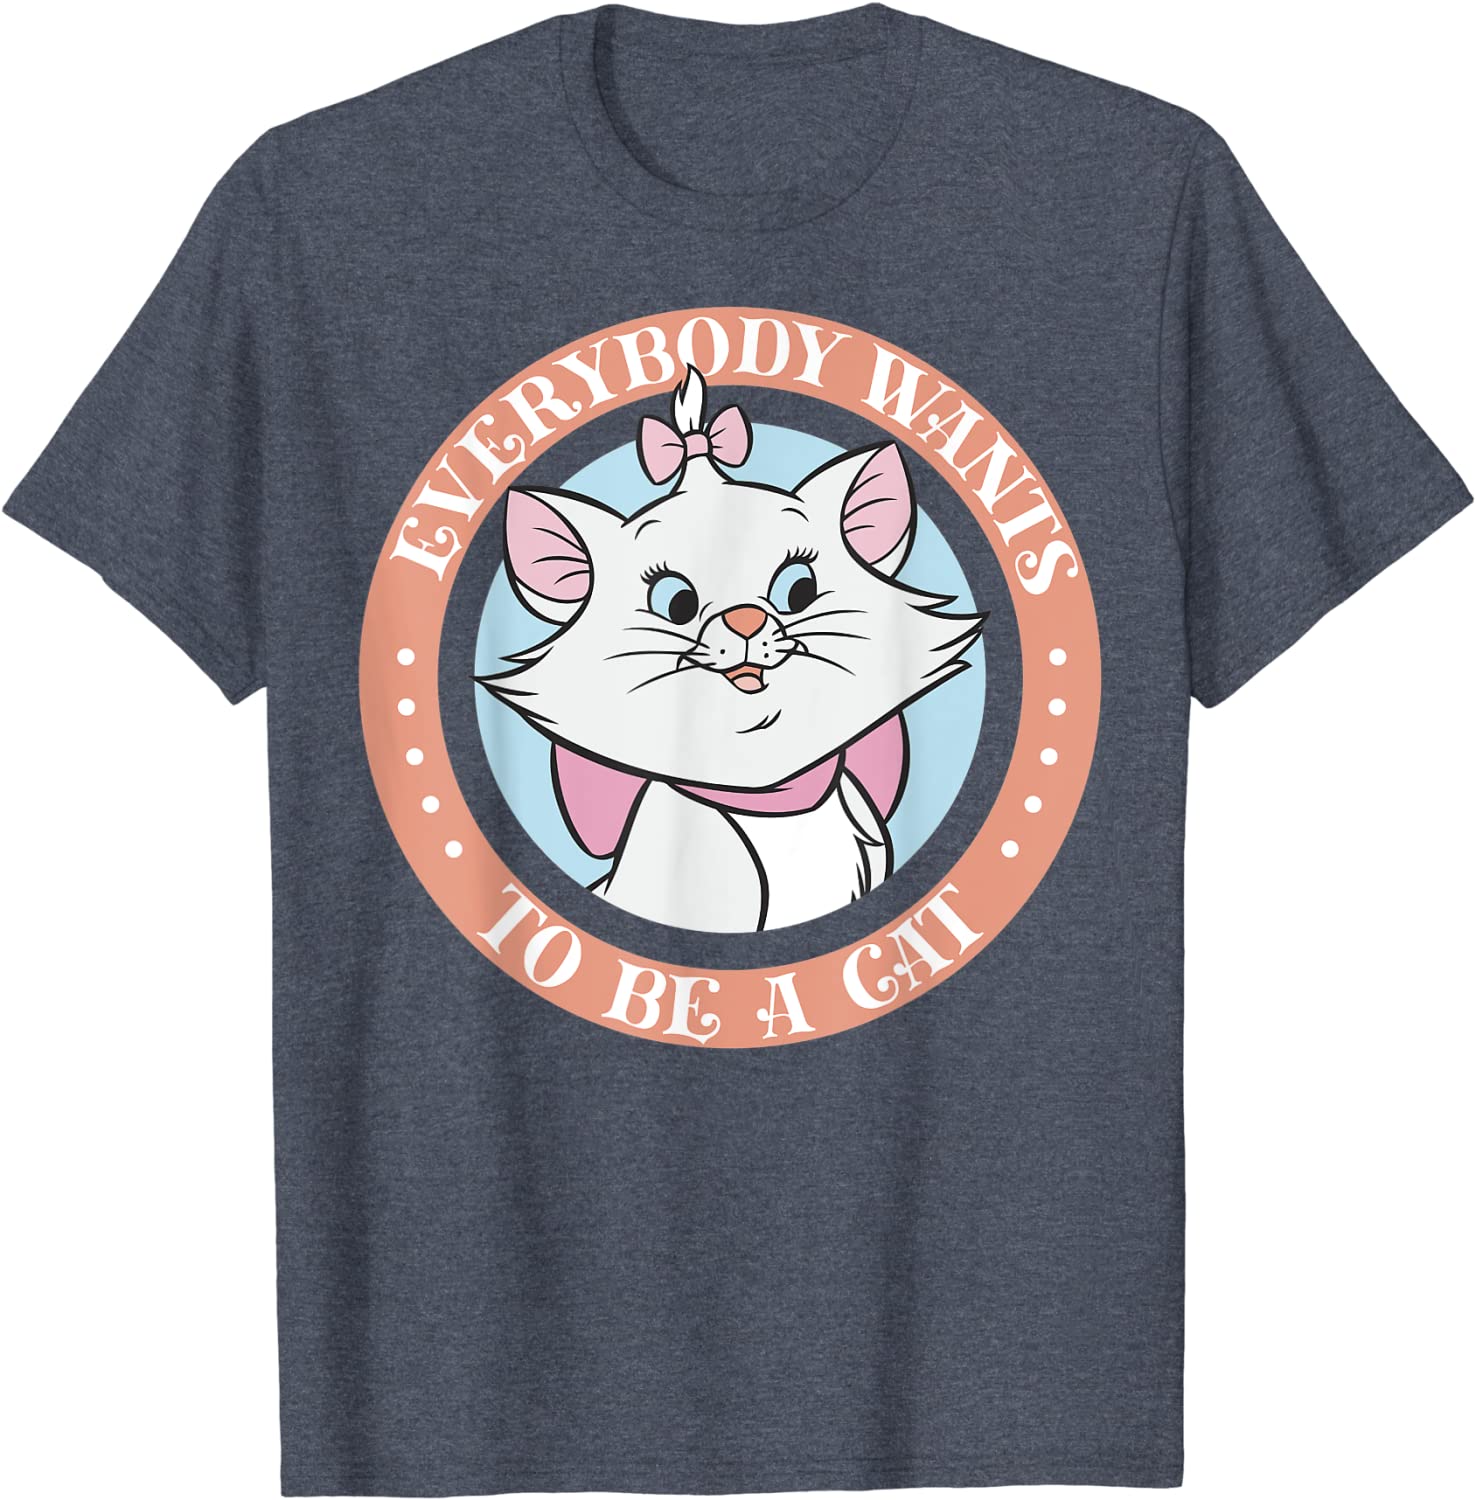 Everyone Wants To Be A Cat T-Shirt